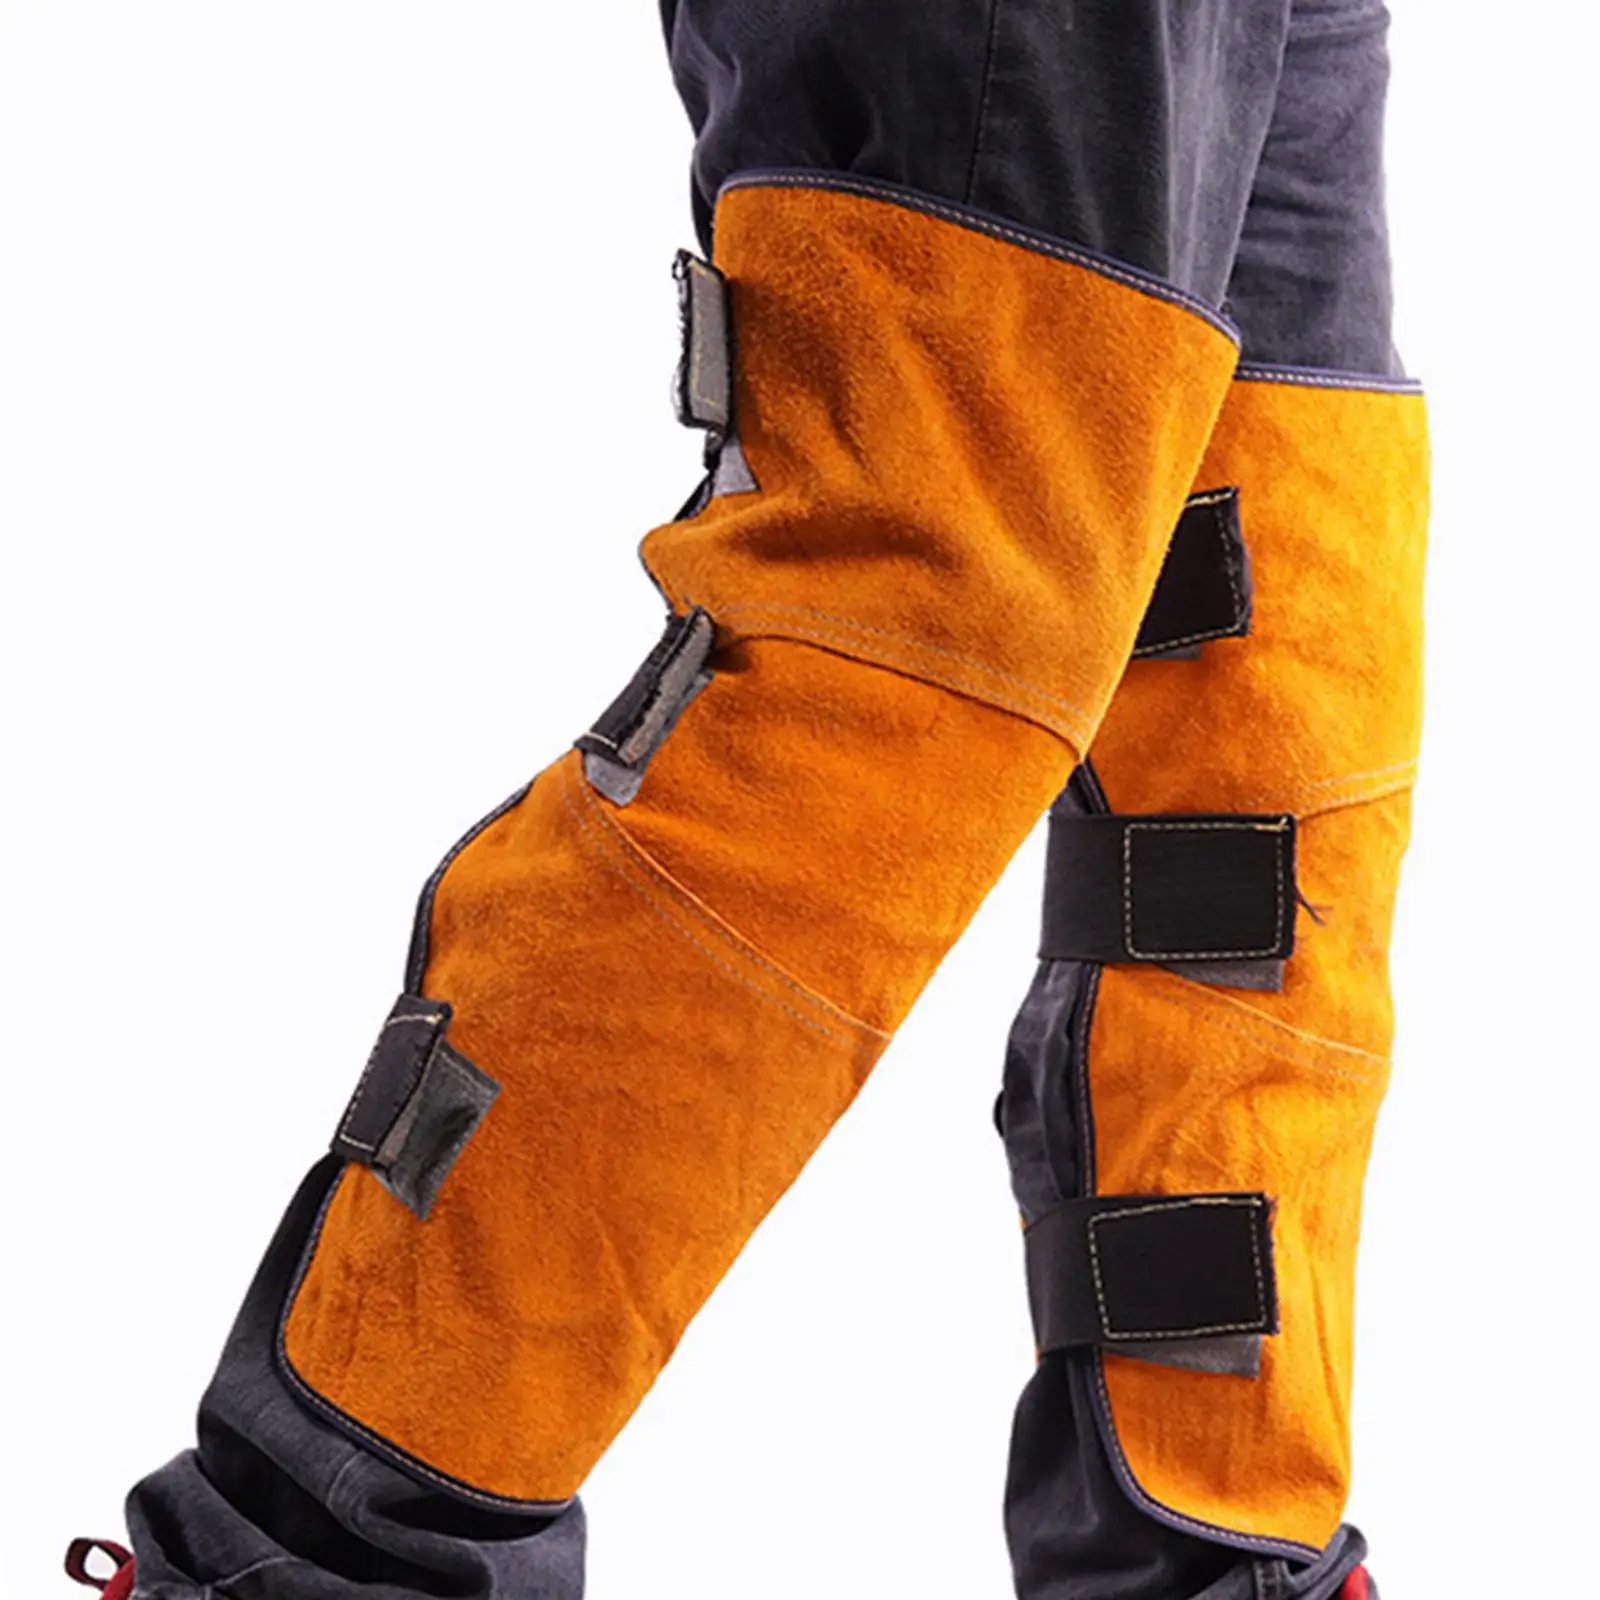 Welding Leg Covers Heat Resistant Fireproof Comfortable Anti Slip Abrasion Resistant Knee Protector Knee Pads Leg Protection